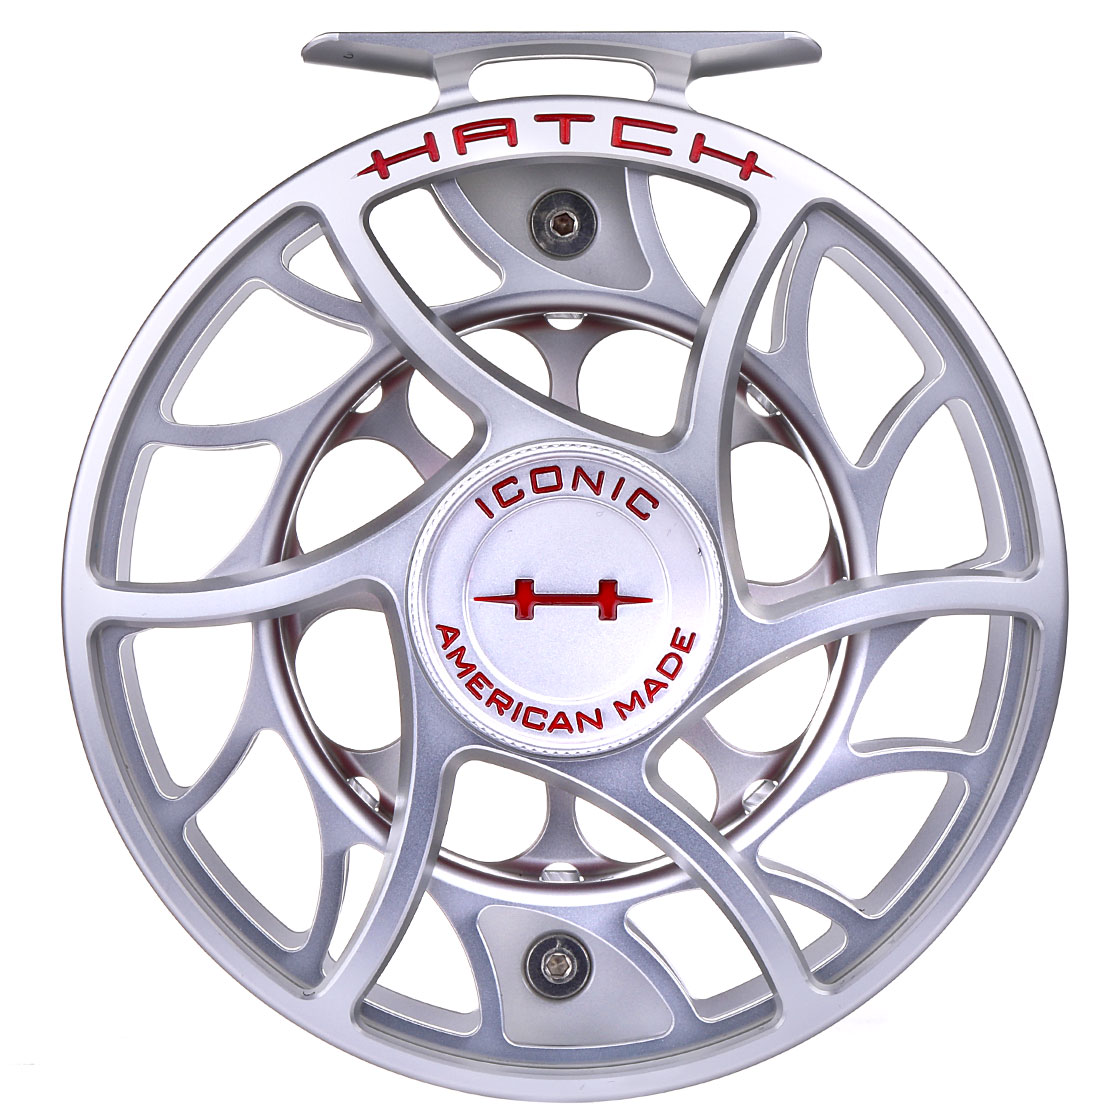 https://www.adh-fishing.com/media/image/f6/b6/52/P-23100_Hatch-Iconic-Fly-Reel-Fliegenrolle-Large-Arbor_front.jpg